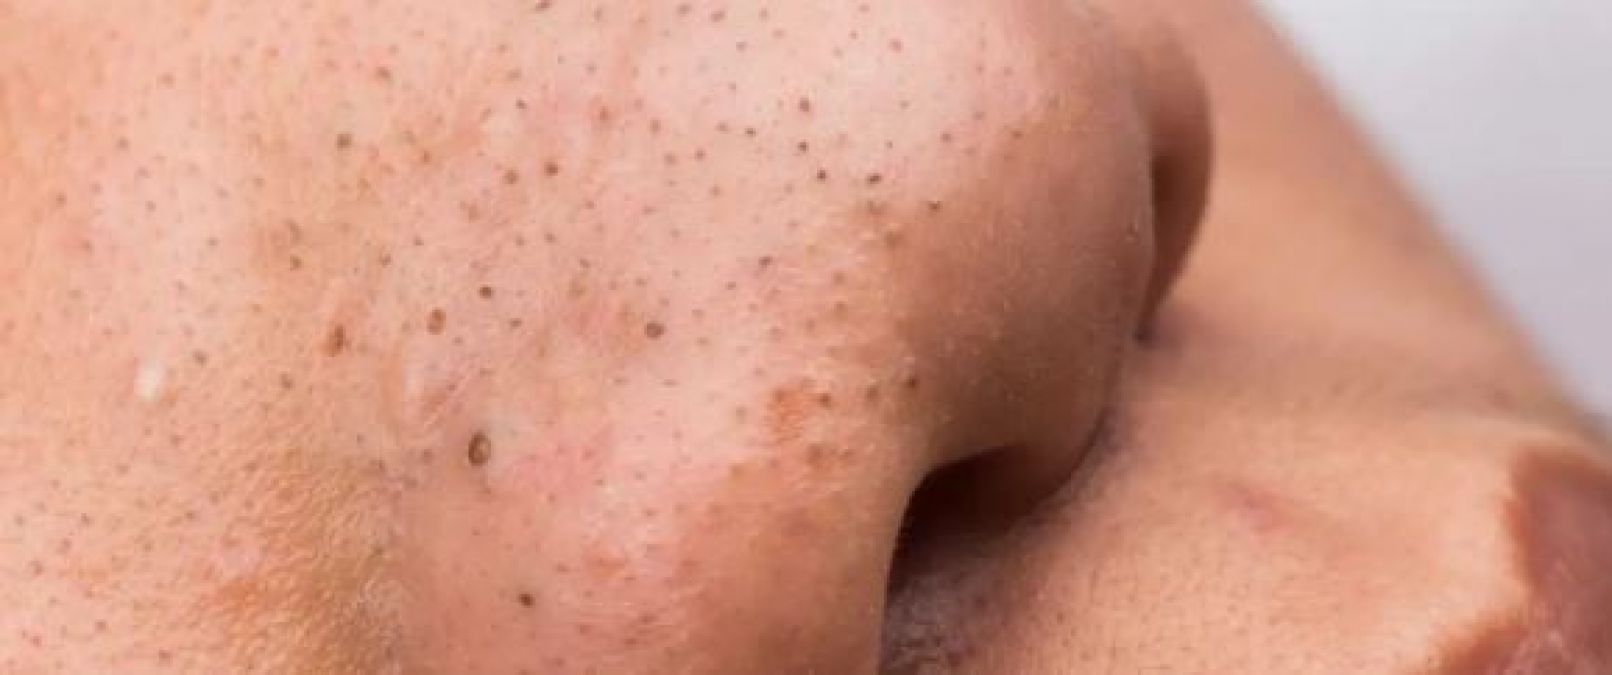 If you are also troubled by blackheads, then follow these home remedies